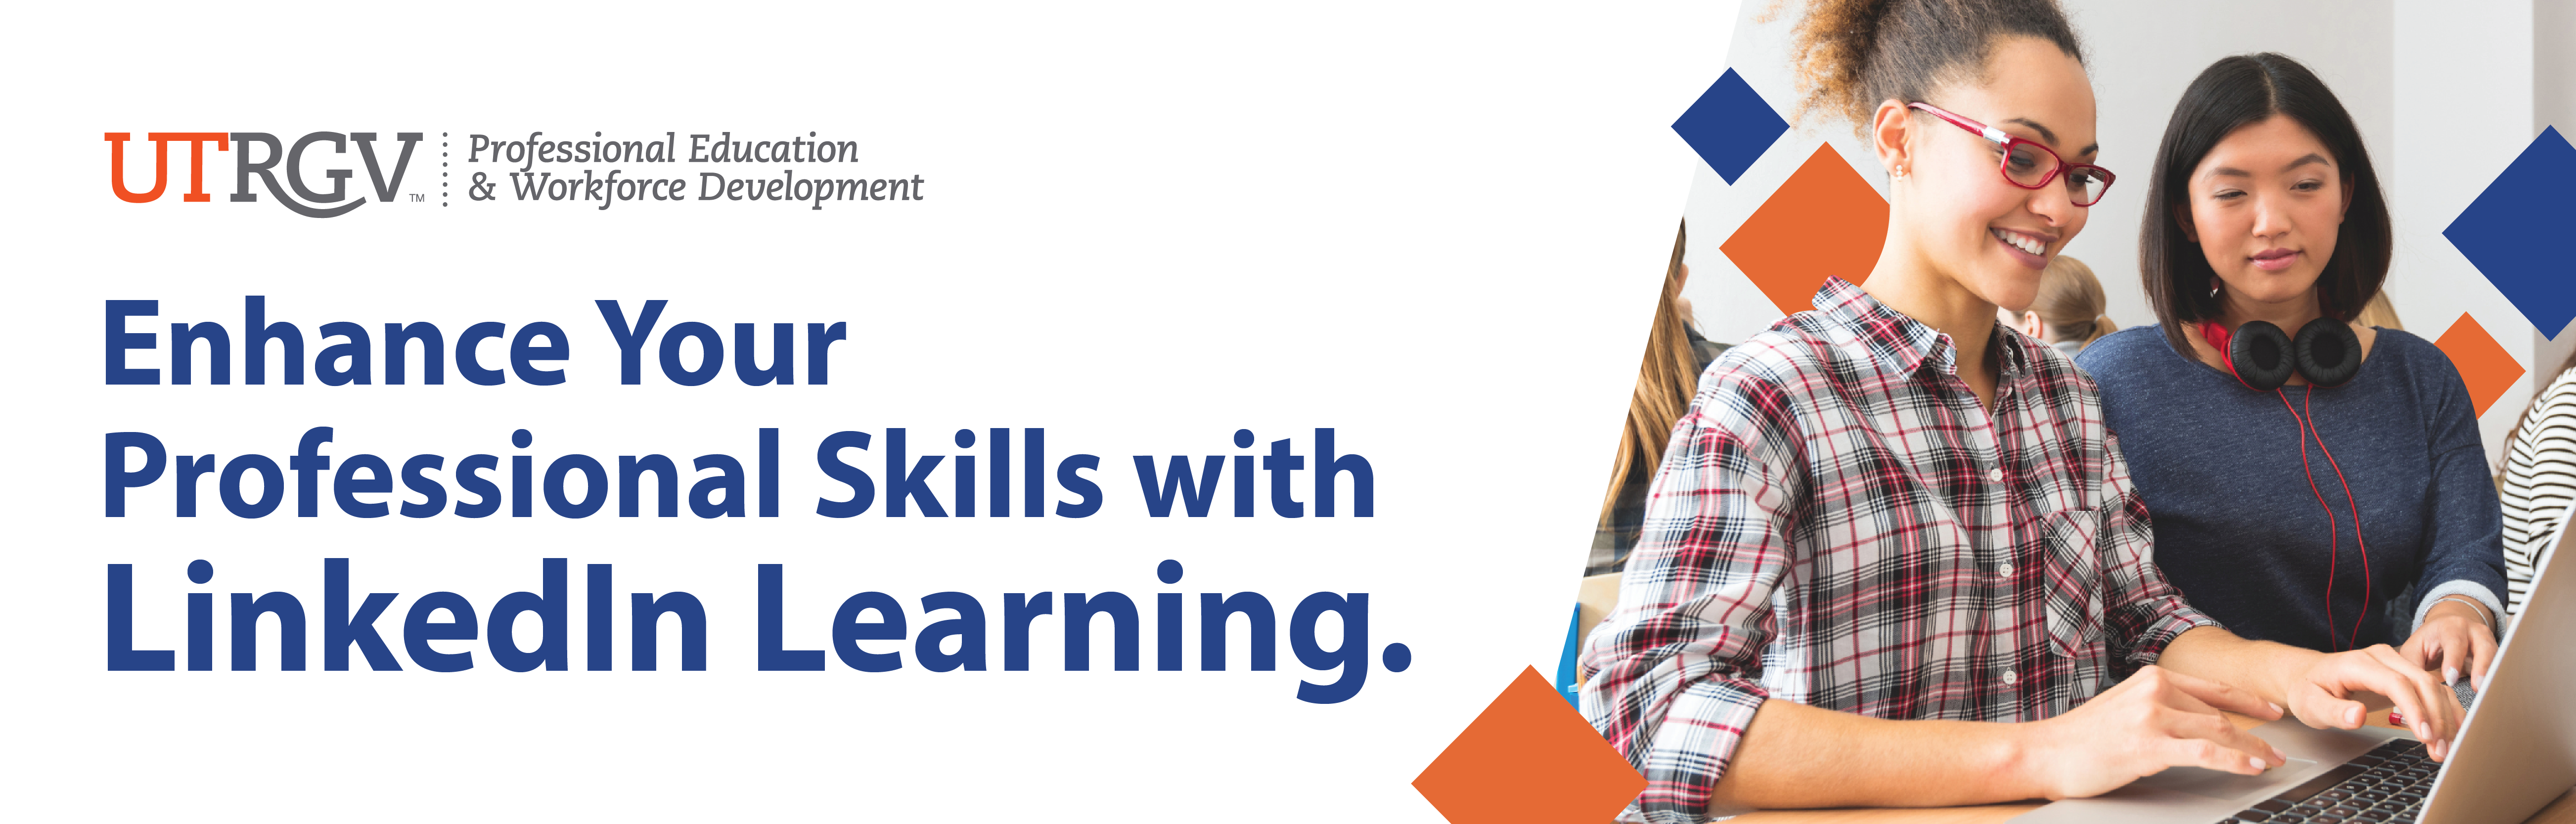 LinkedIn Learning - Learn without limits Page Banner 